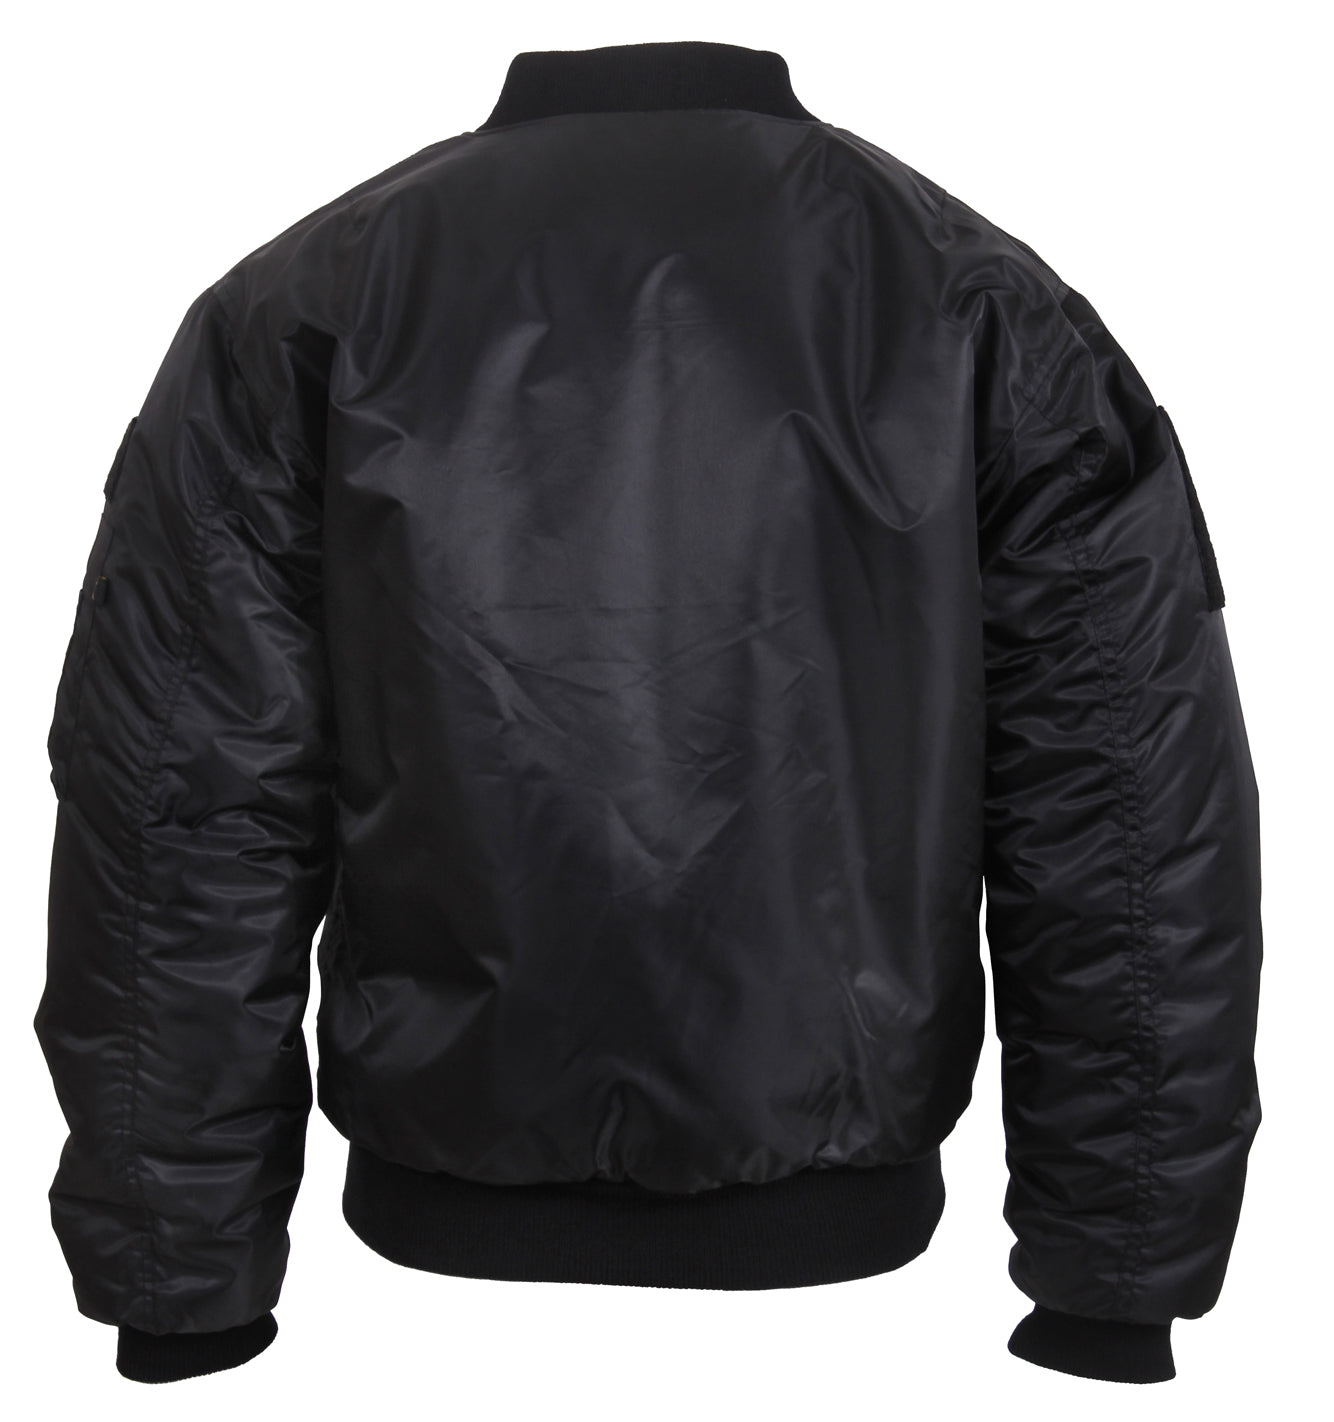 Rothco MA-1 Flight Jacket With Patches – Grunt Force